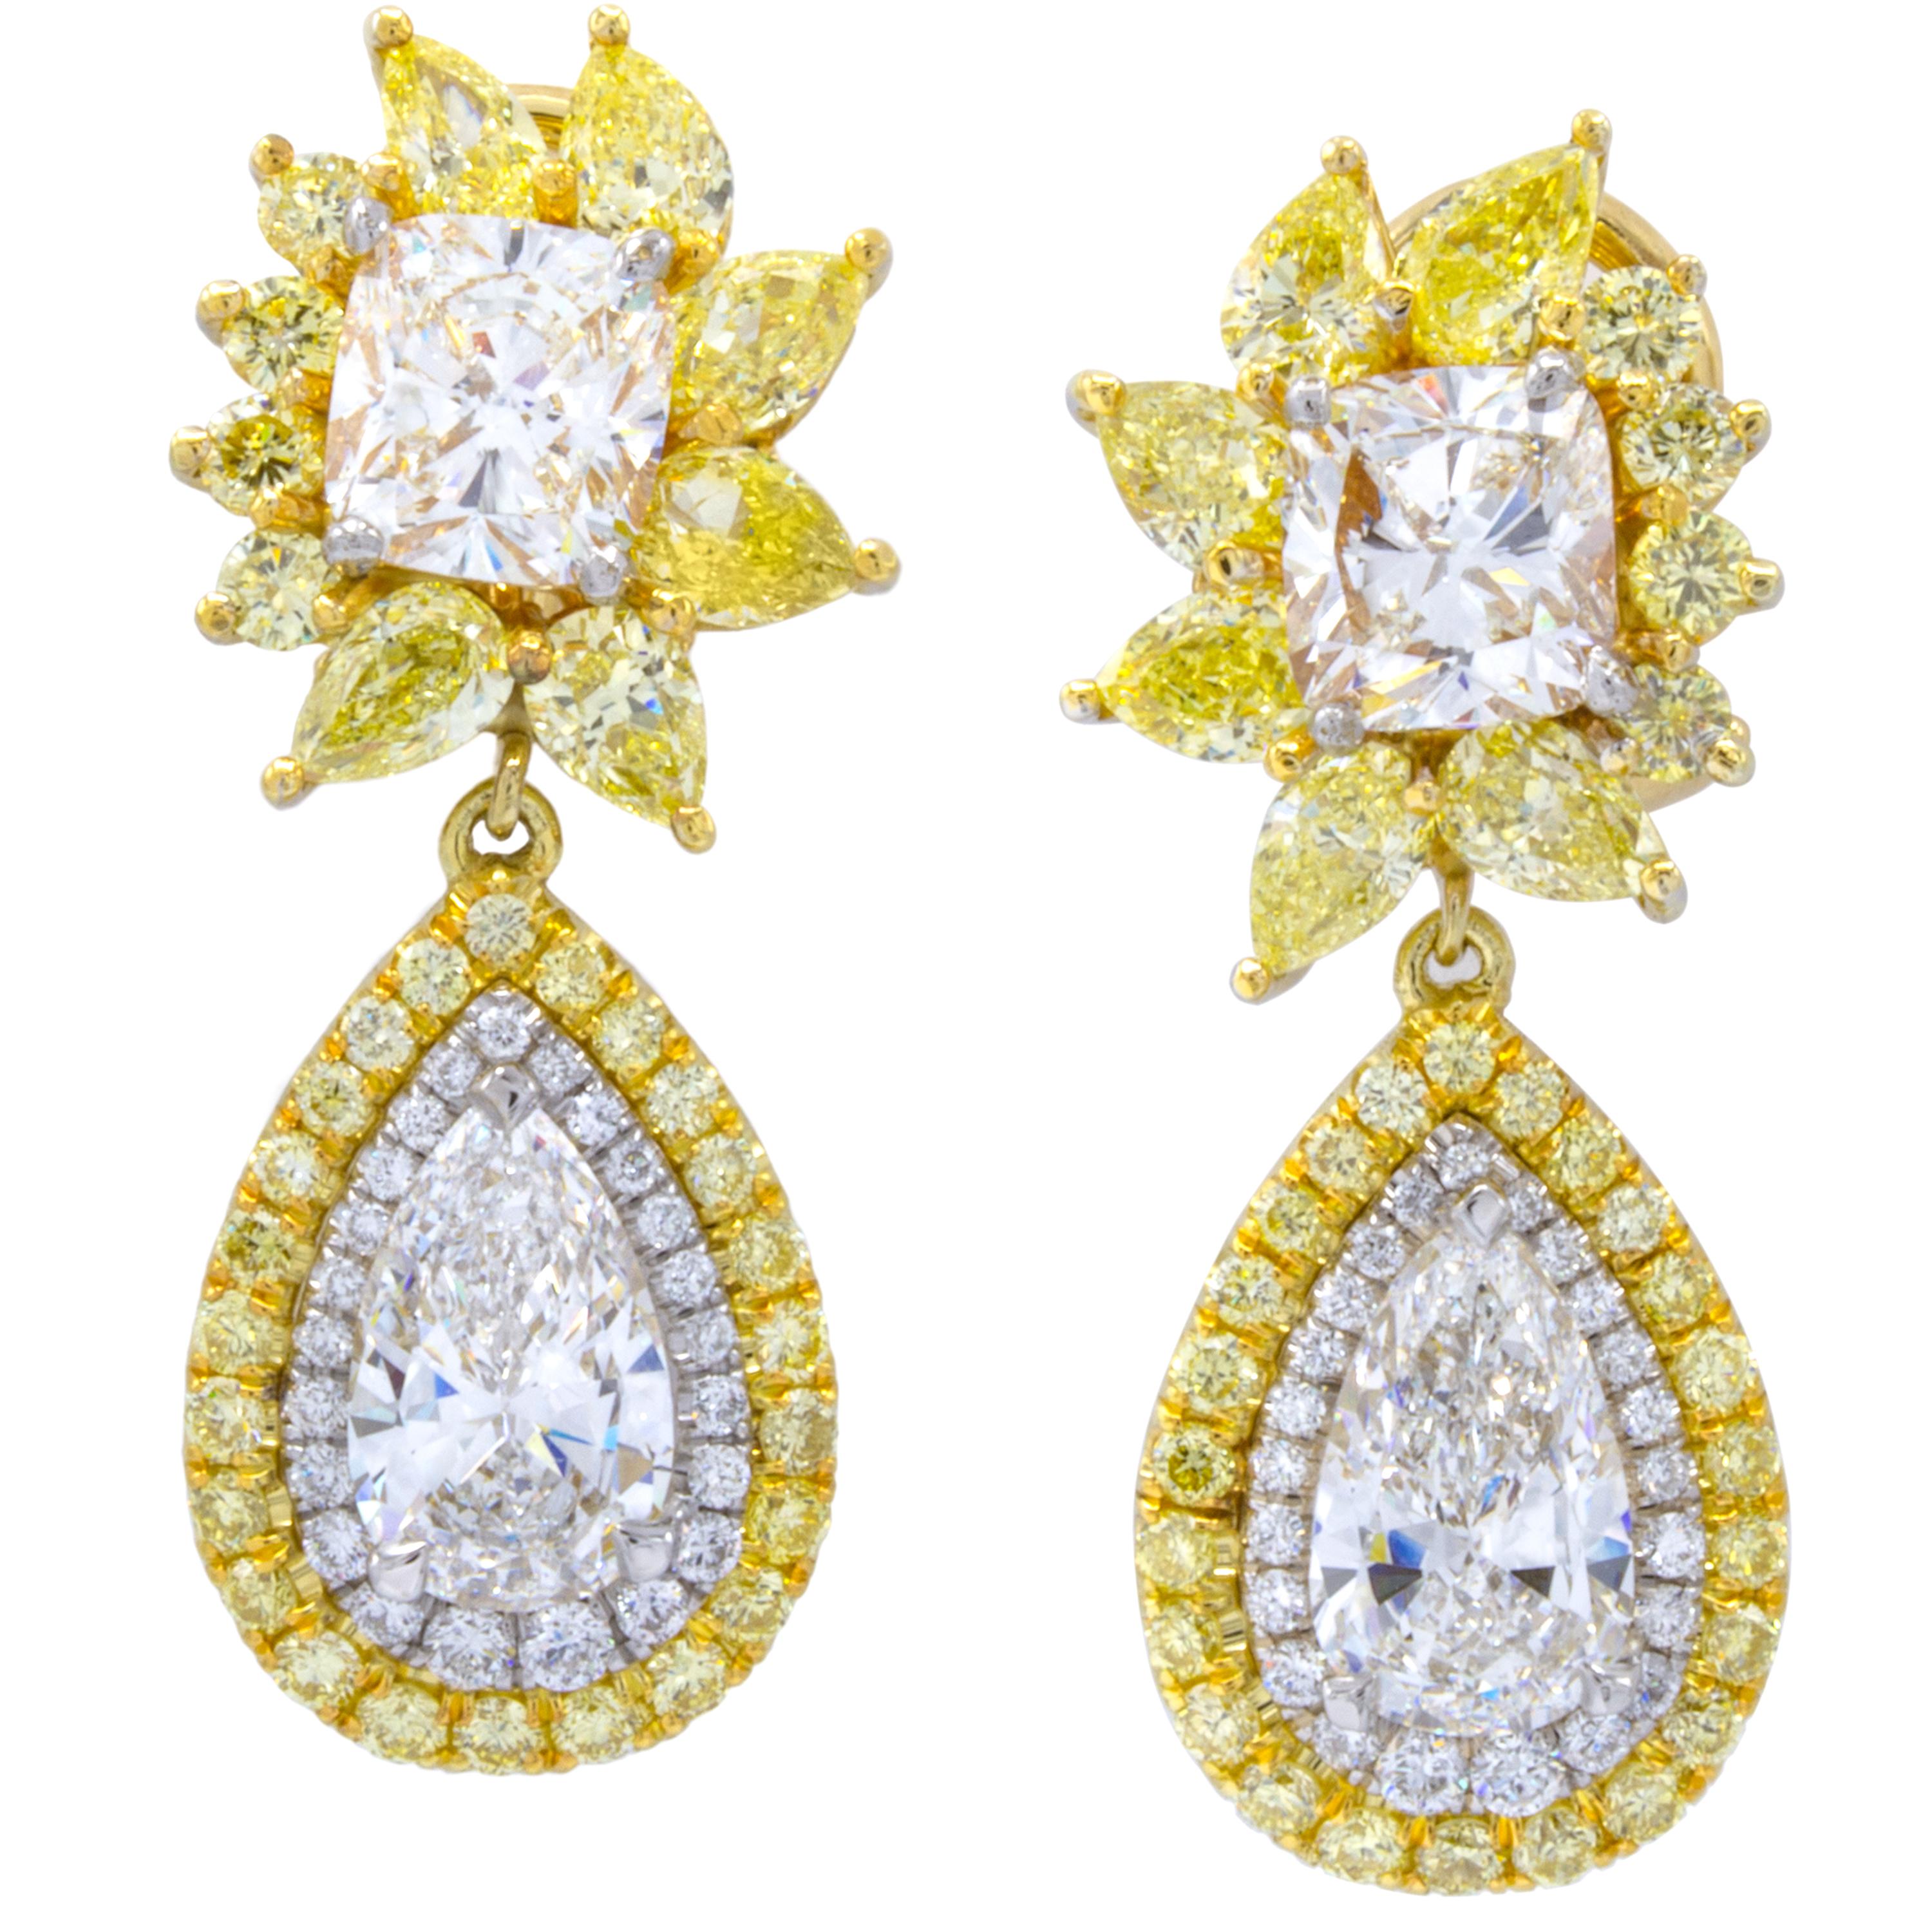 A delectable pair of flowery diamond dangle earrings display incredible color within 2.98 carats of natural fancy intense yellow pear shape diamonds. Nestled between lay perfectly matched white cushion cut diamonds and pear shaped drops surrounded